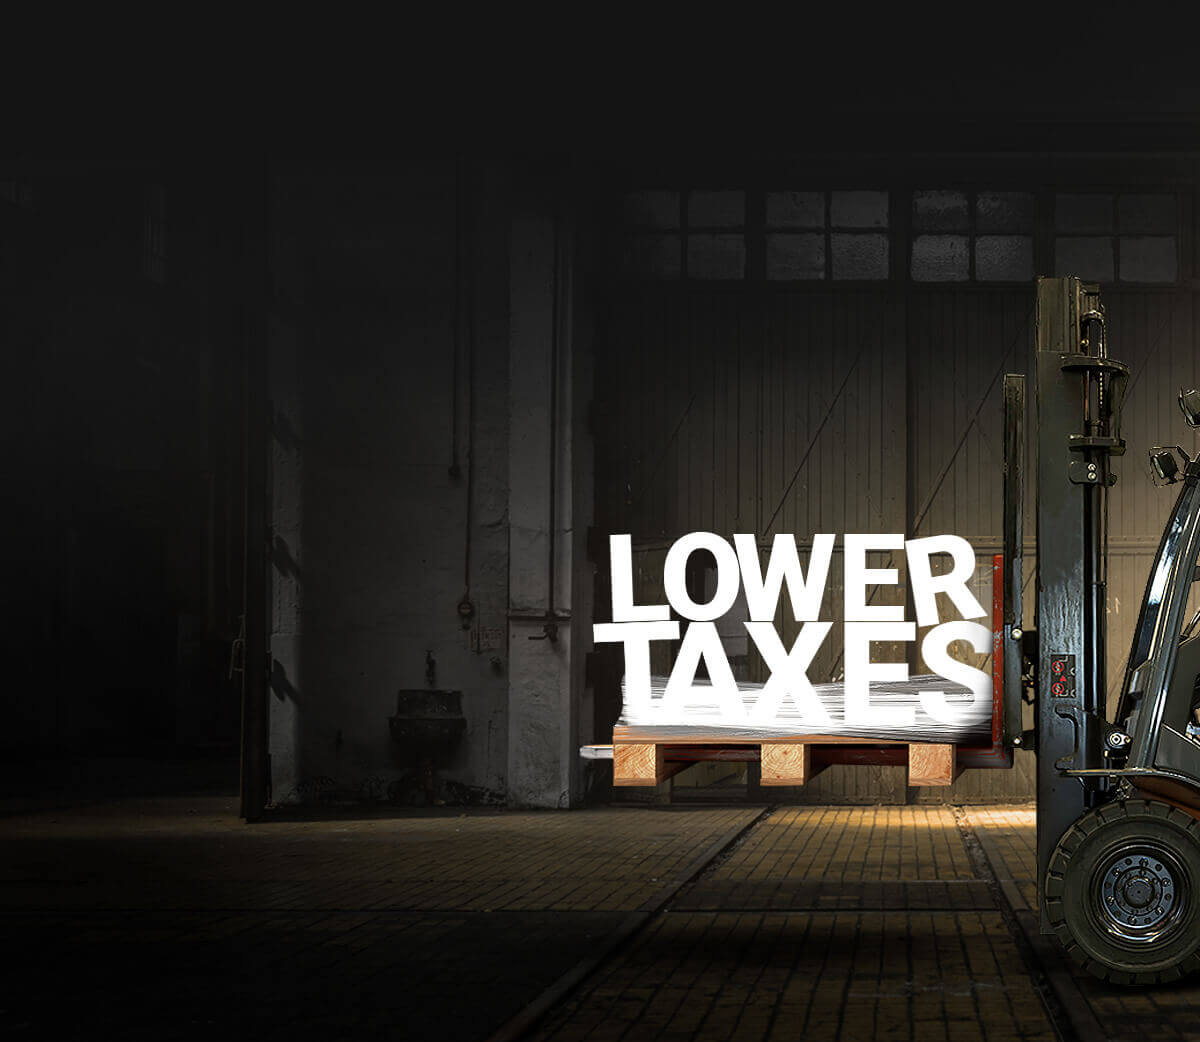 Forklift & Equipment Purchases are Tax Deductible